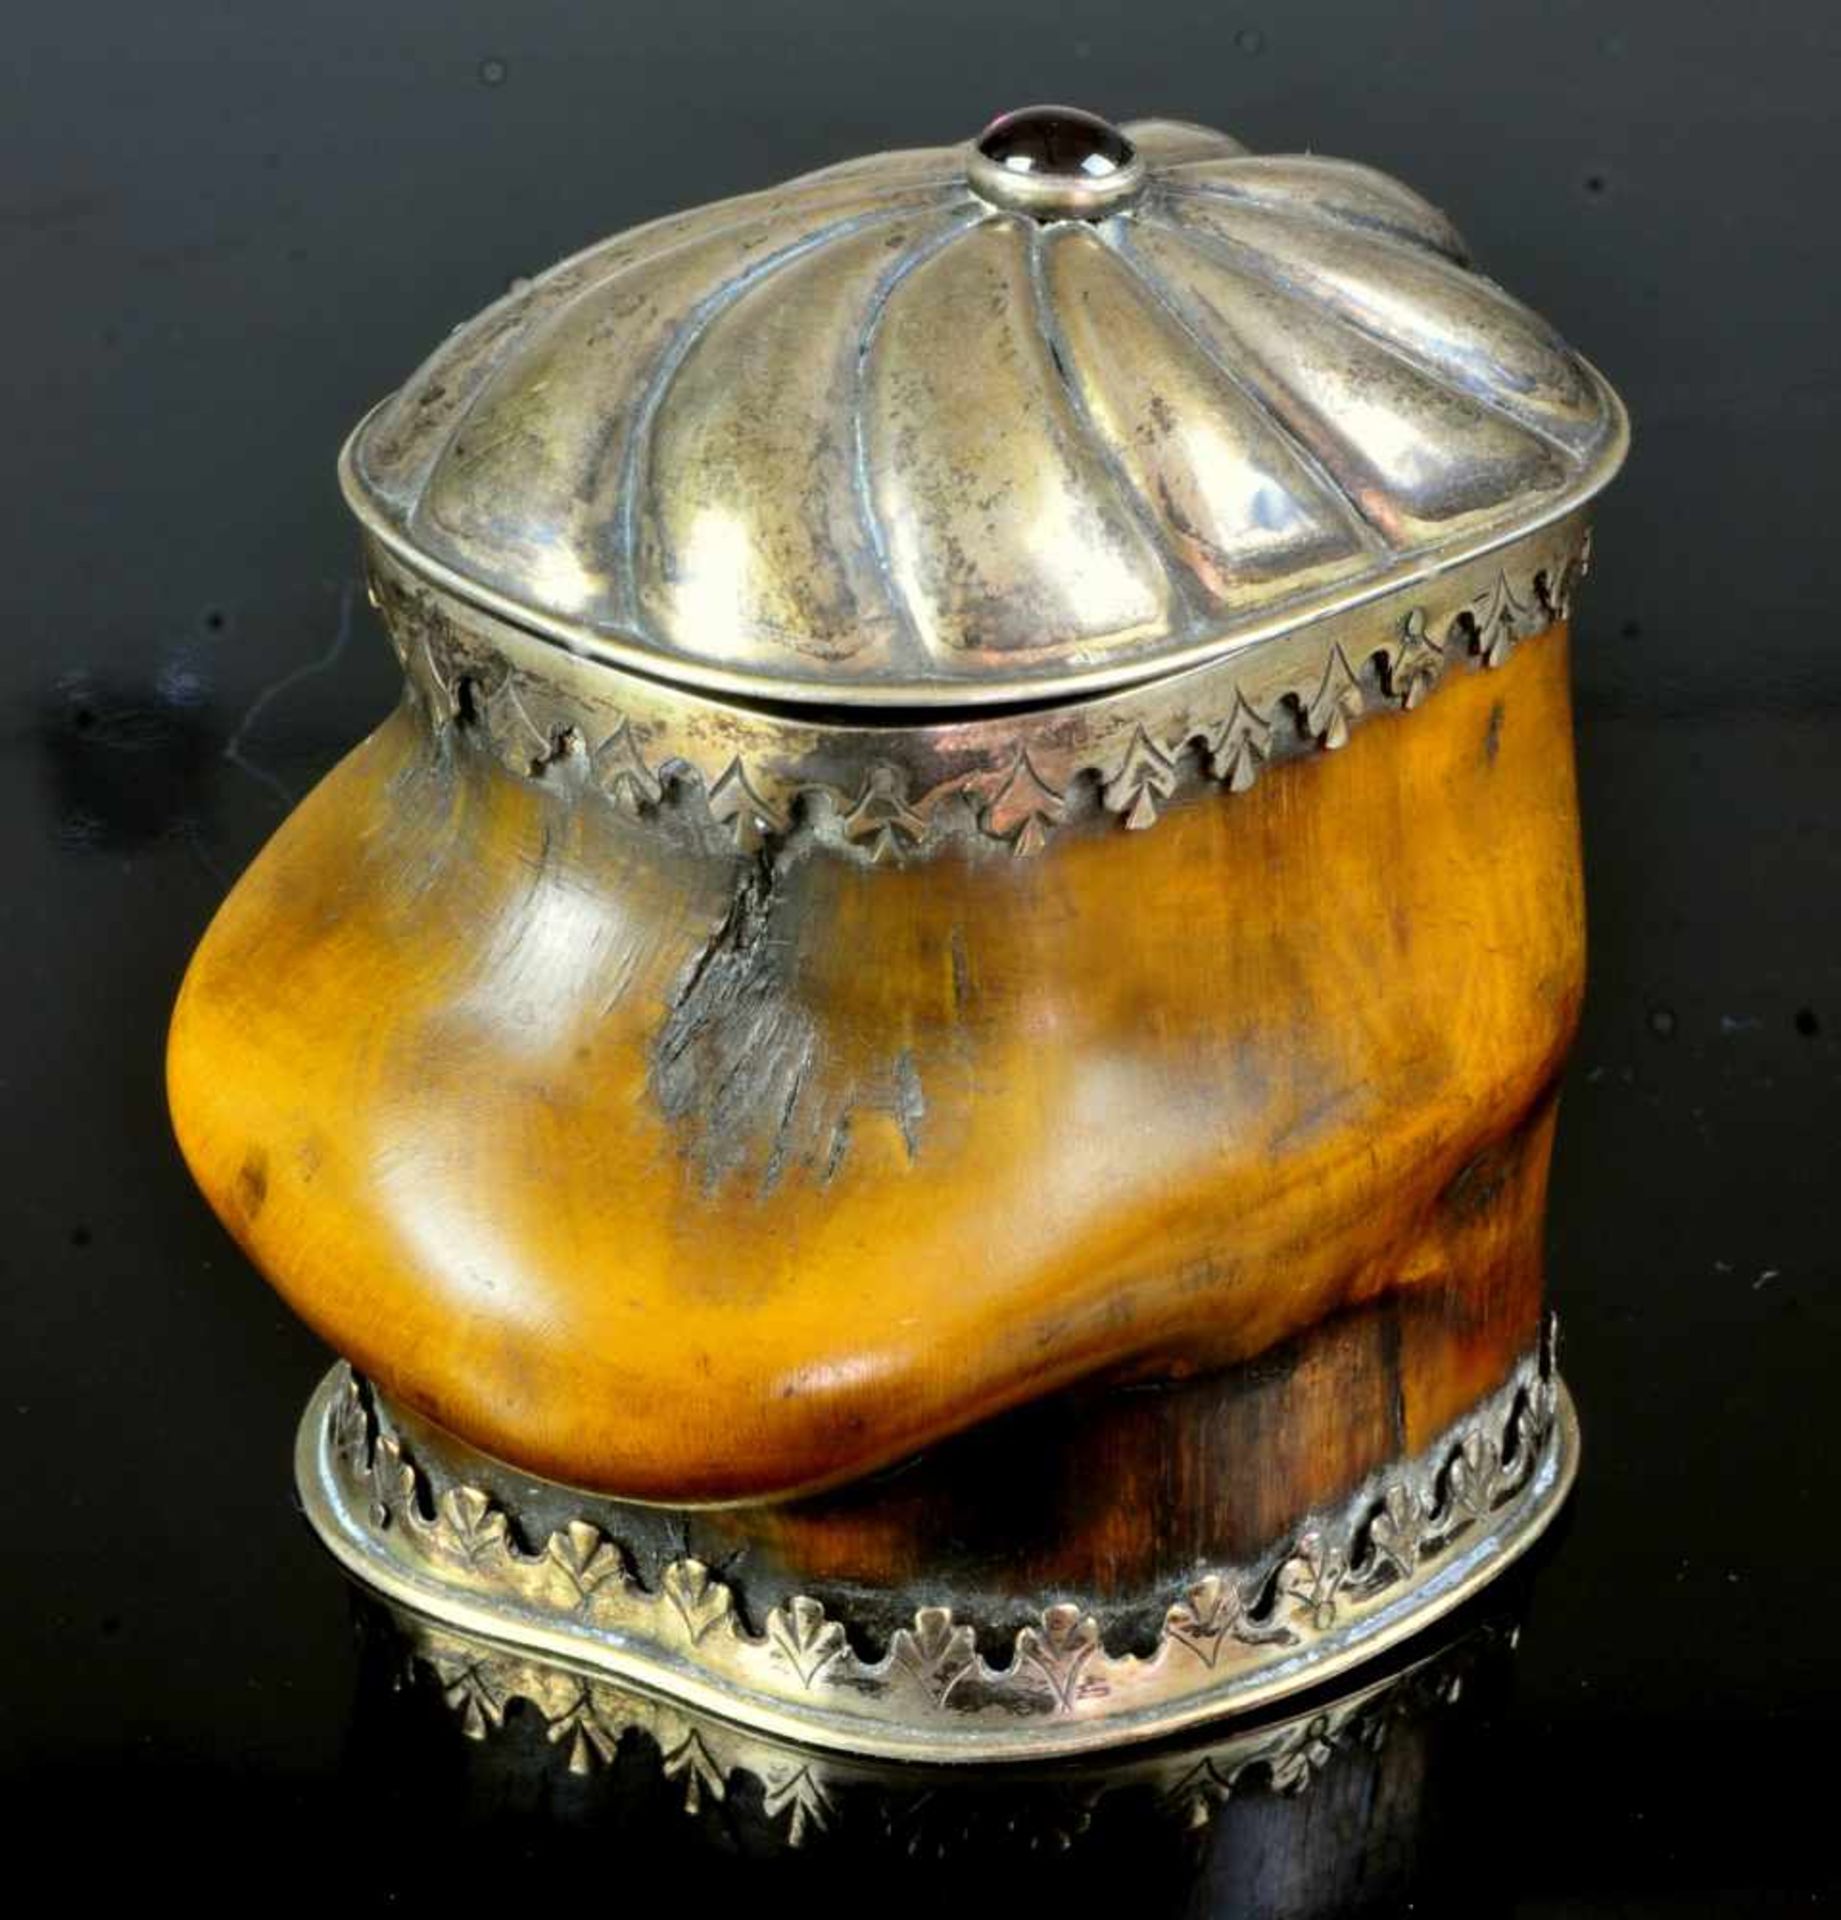 A GERMAN SILVER MOUNTED SNUFF BOX OF STEINBOCK HORN, MID TO LATE 18TH CENTURY.Origin: Germany,